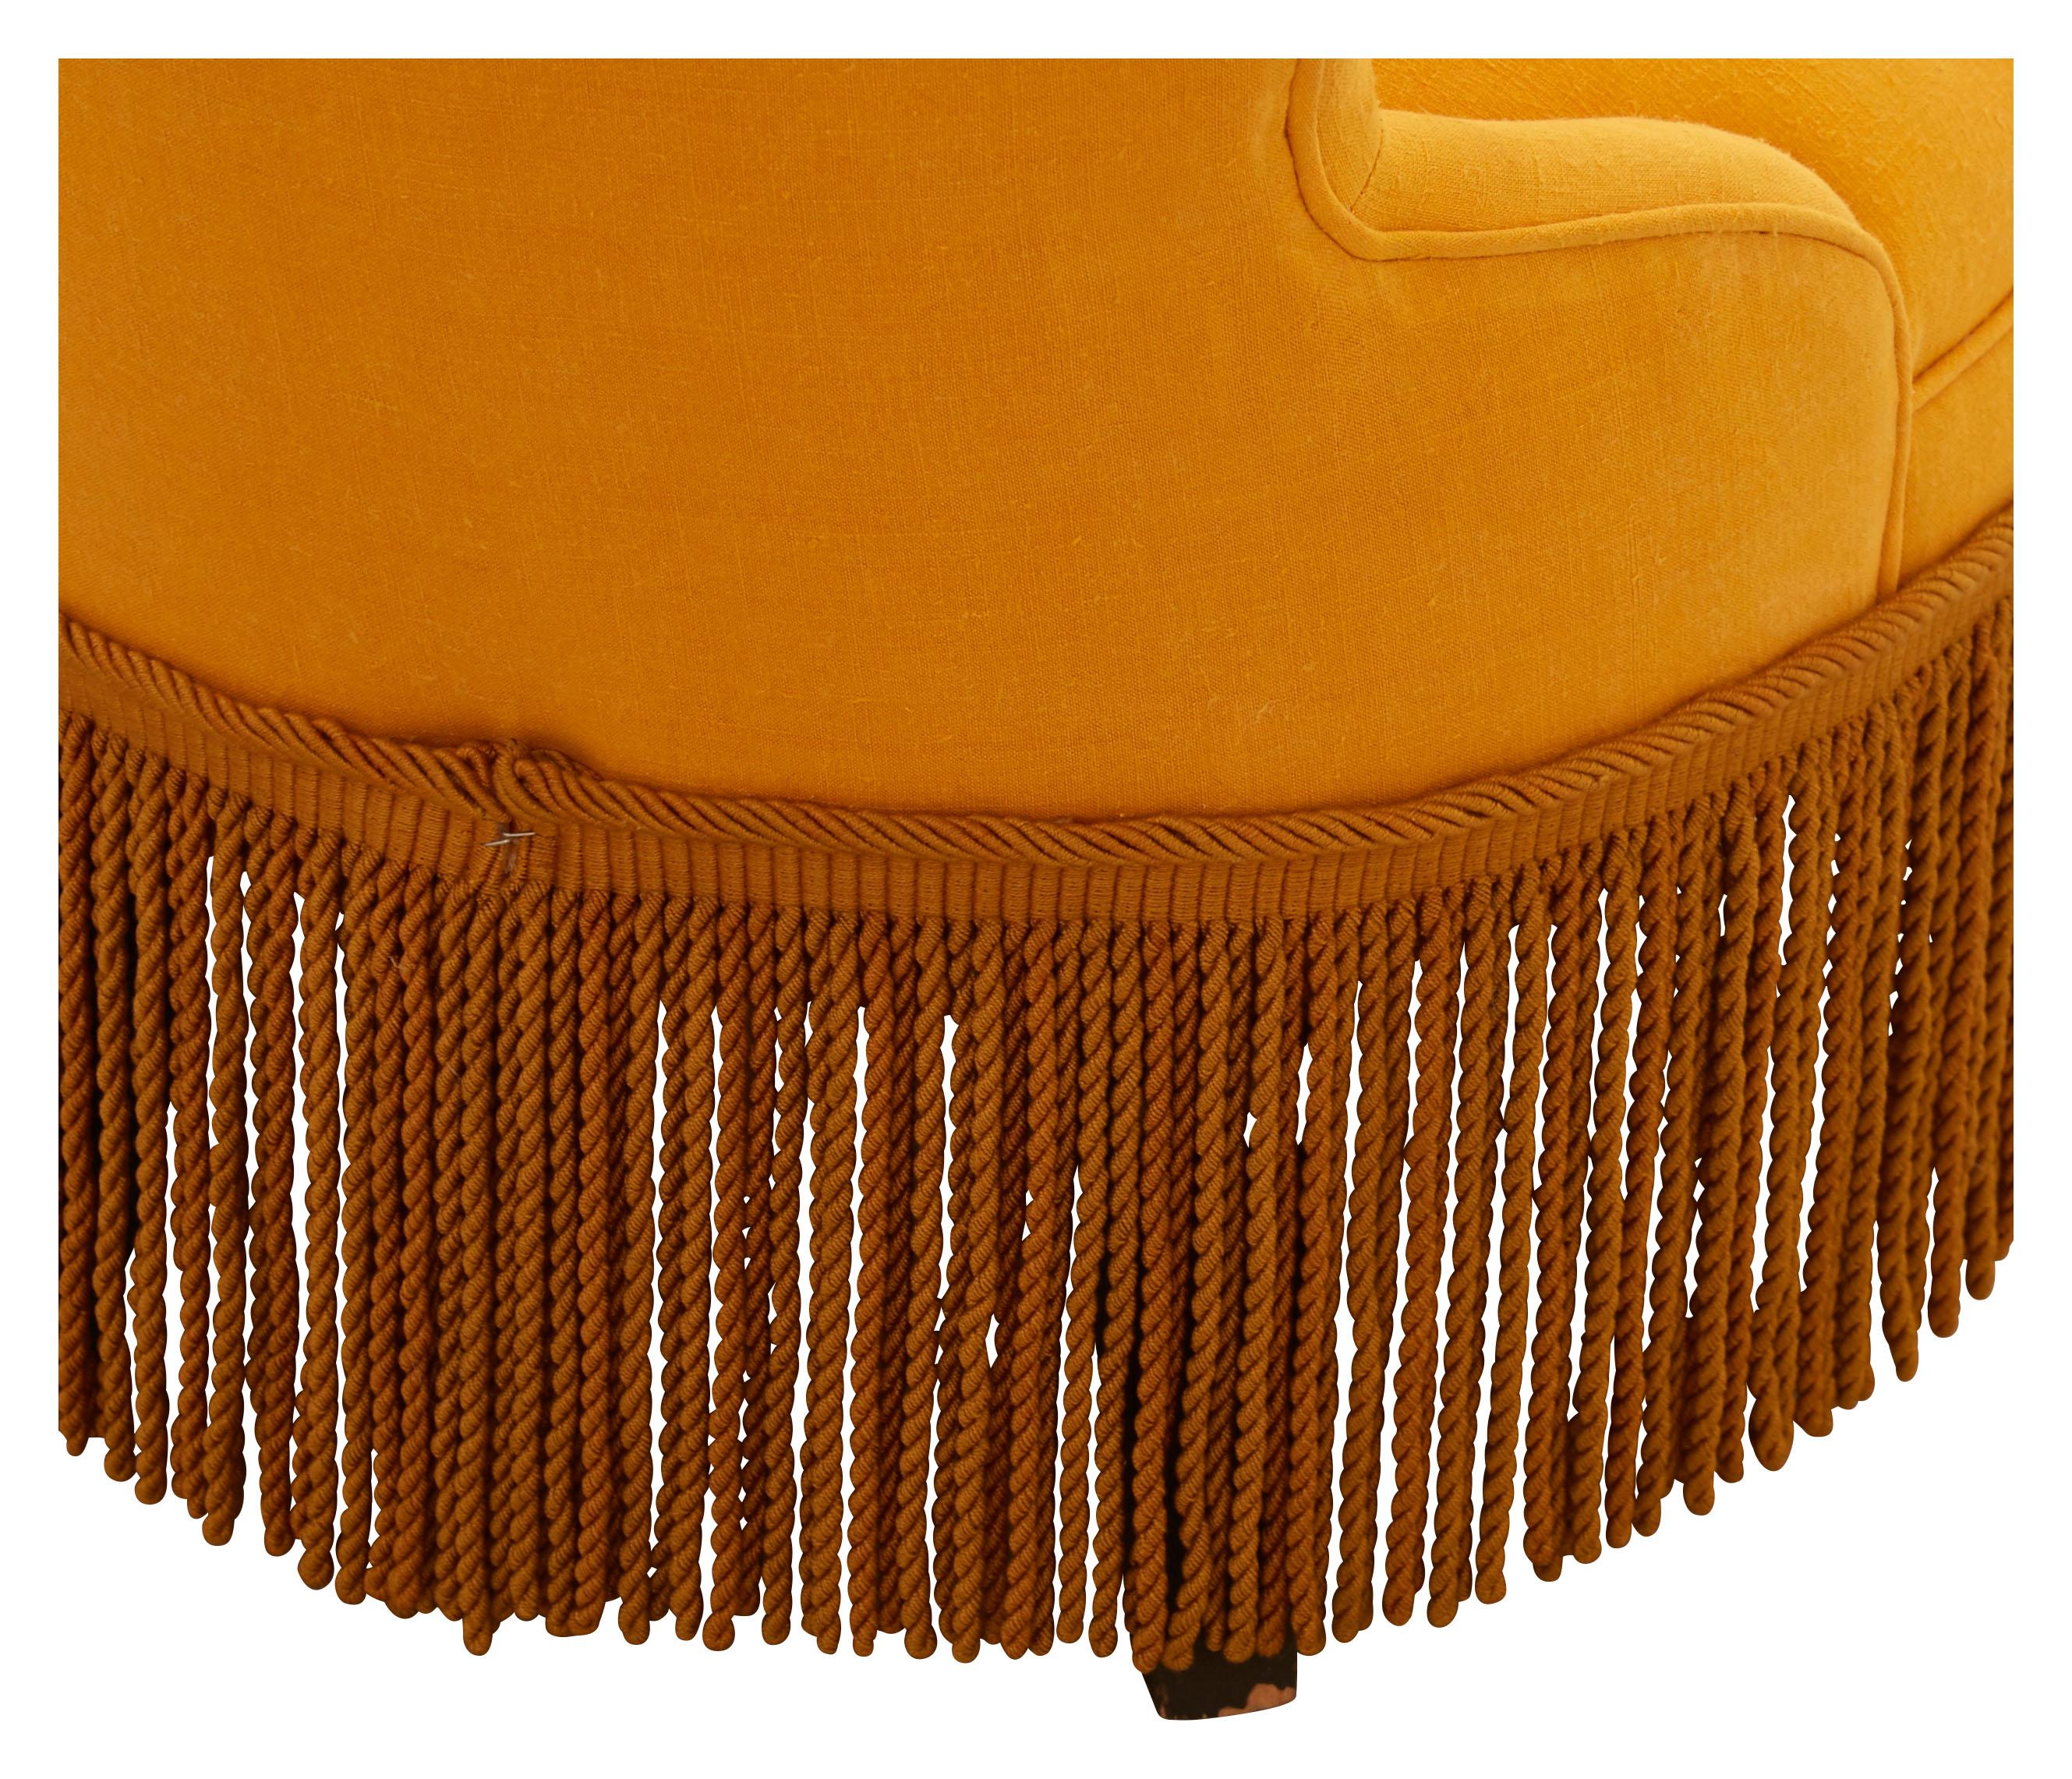 Linen Late 19th Century Fringed Yellow Slipper Chair